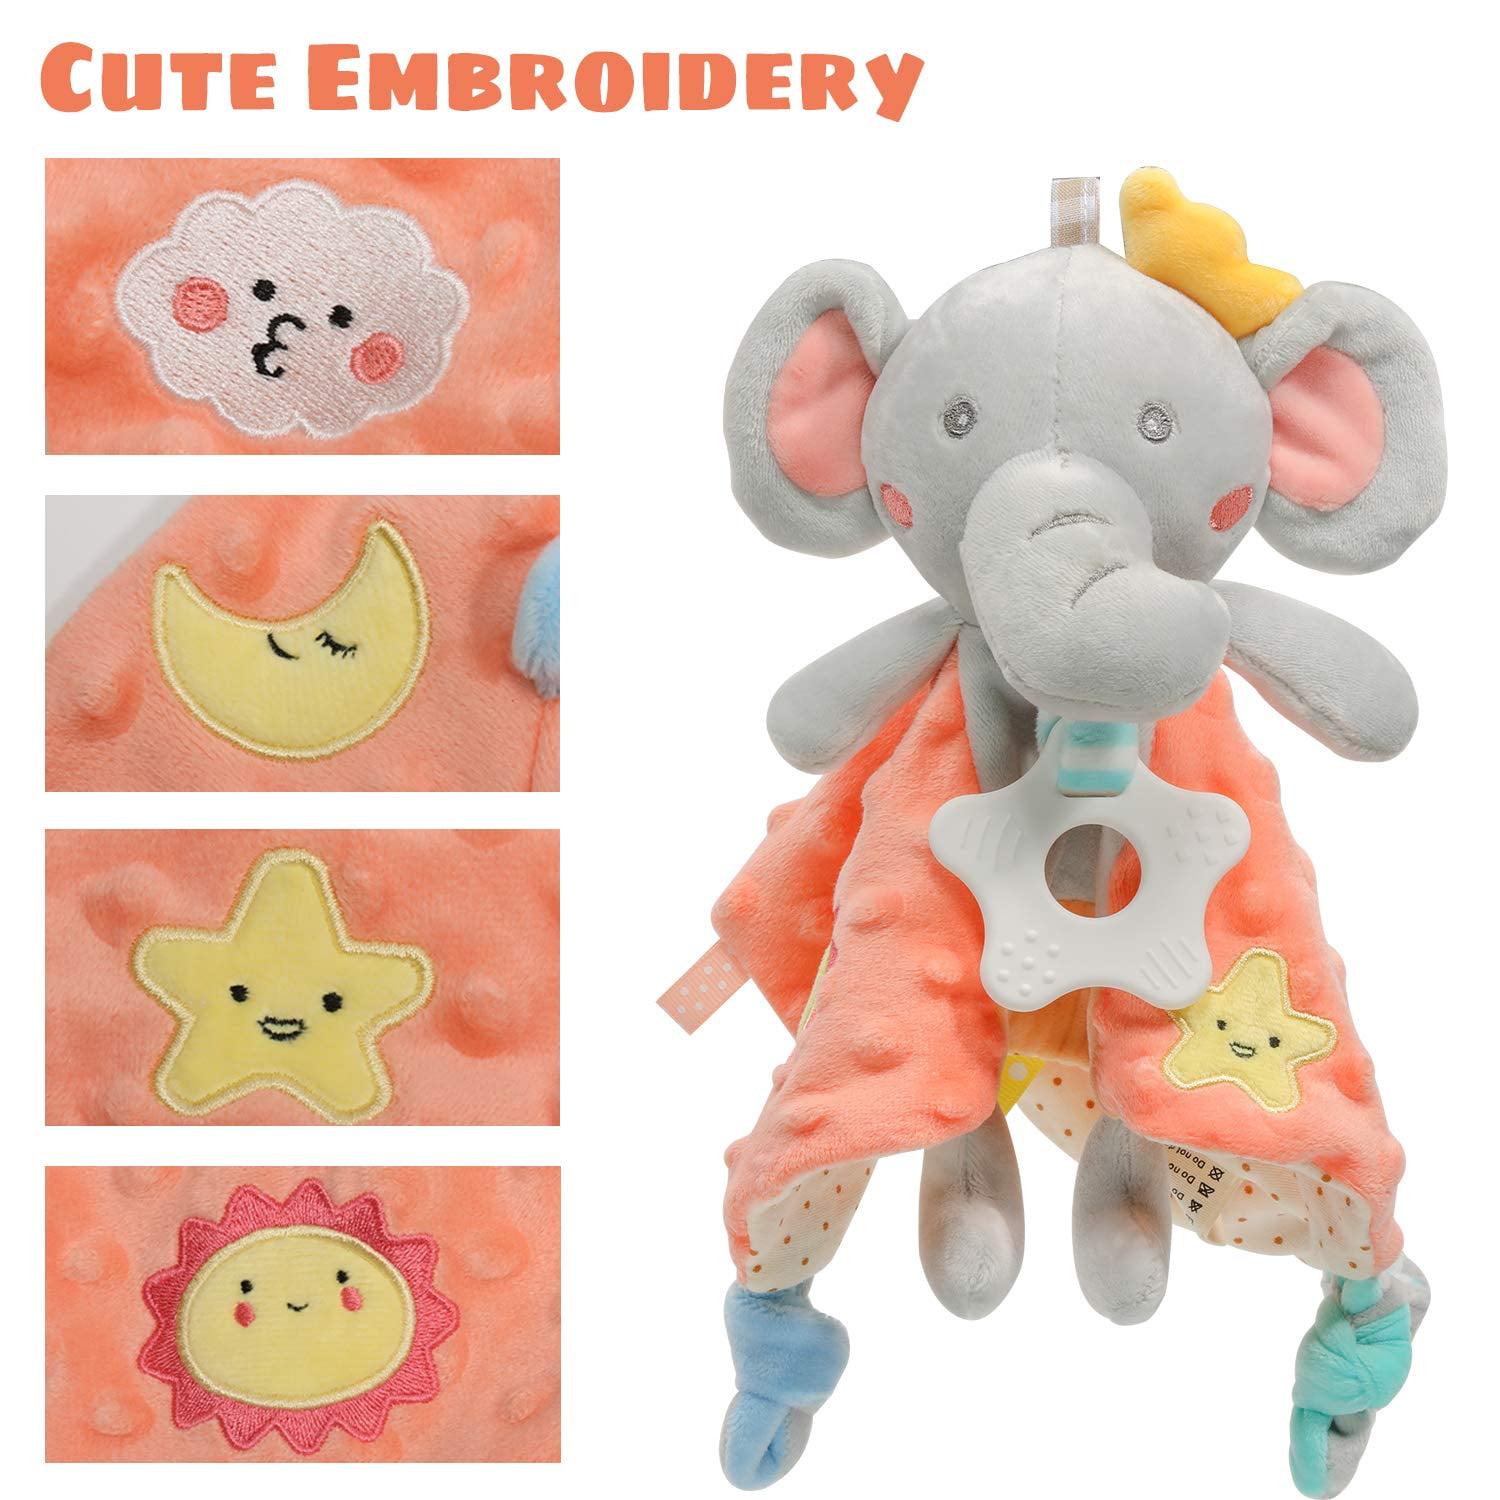 EXCEART Baby Infant Newborn Soothing Towel Stuffed Animal Security Blanket Toy with Tags 